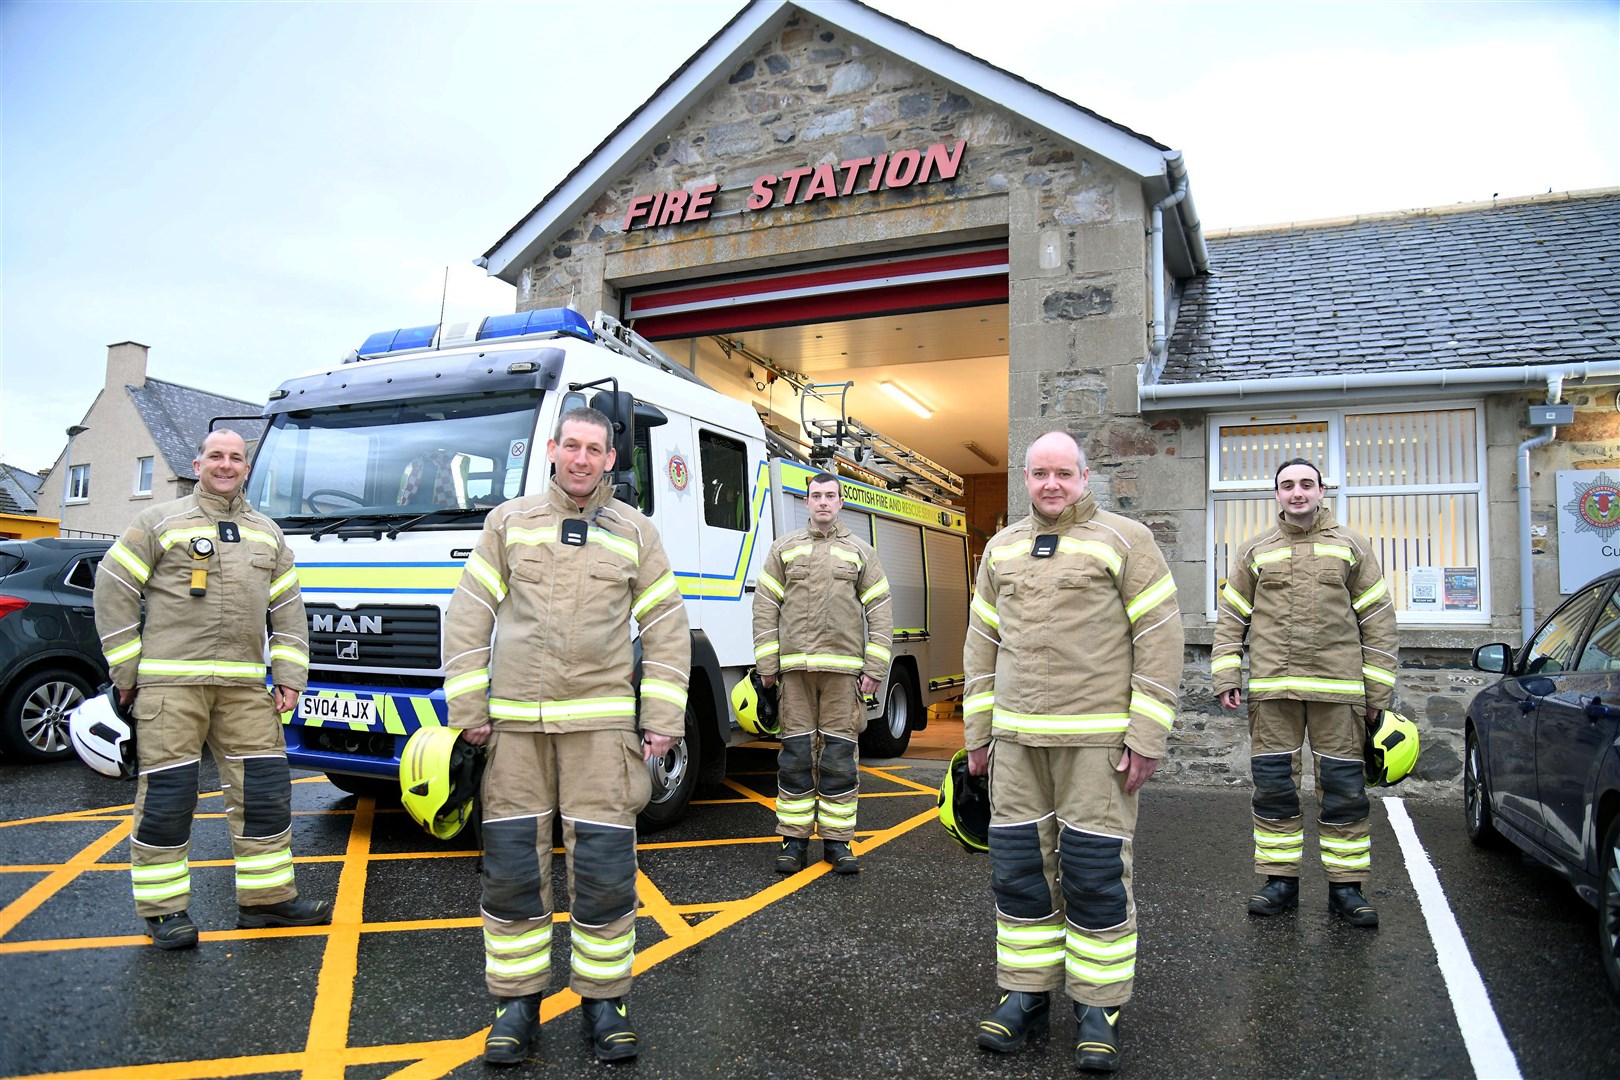 Serving the community – (from left) Simon Tucker, John Jappy, Stephen Murray, Graeme Smith and Brennan Dawson. Picture: Becky Saunderson